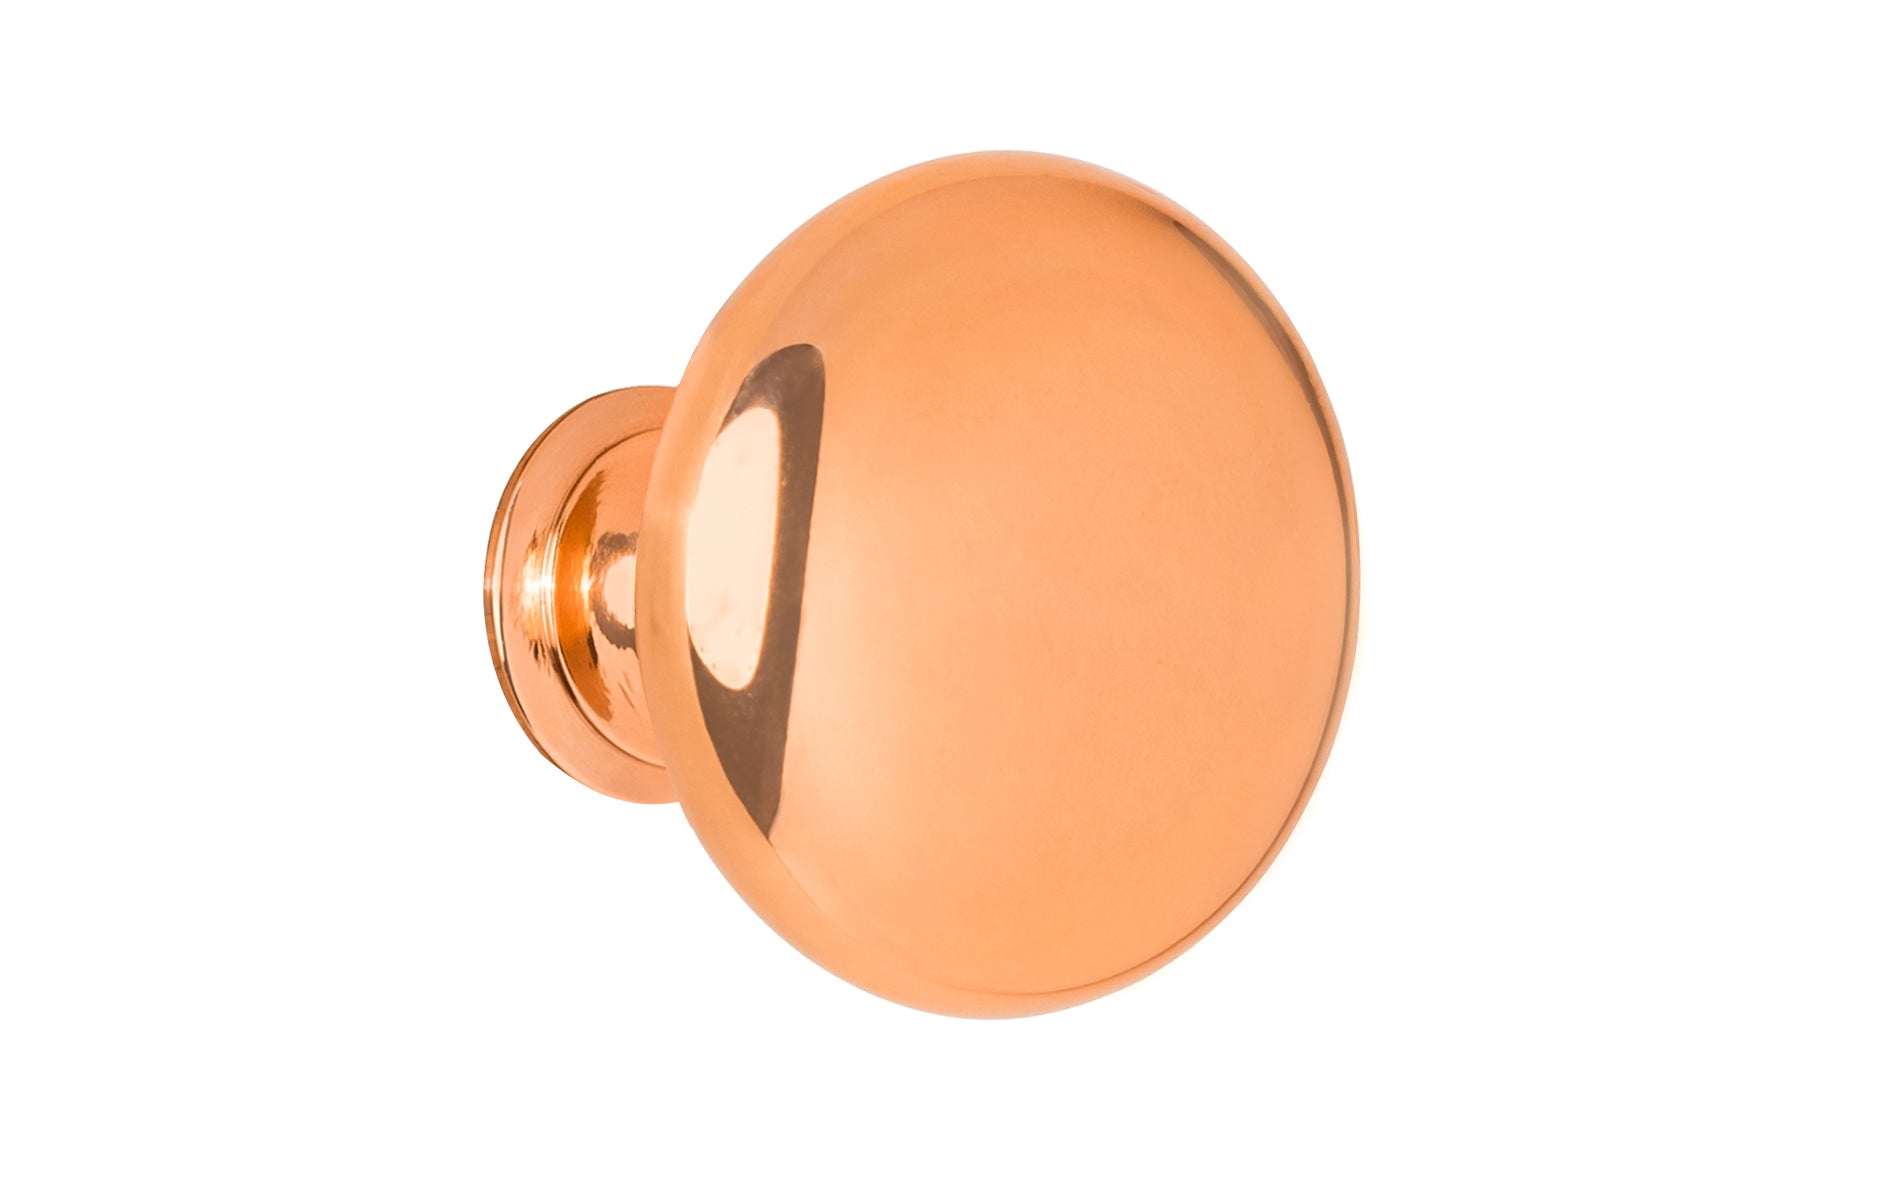 Vintage-style Hardware · Traditional & Classic Brass Knob with a Polished Copper Finish. 1-1/2" diameter size knob. Made of high quality brass, this stylish round cabinet knob has a smooth look & feel on a pedestal shaped base. Works great in kitchens, bathrooms, on furniture, cabinets, drawers. Authentic reproduction hardware.